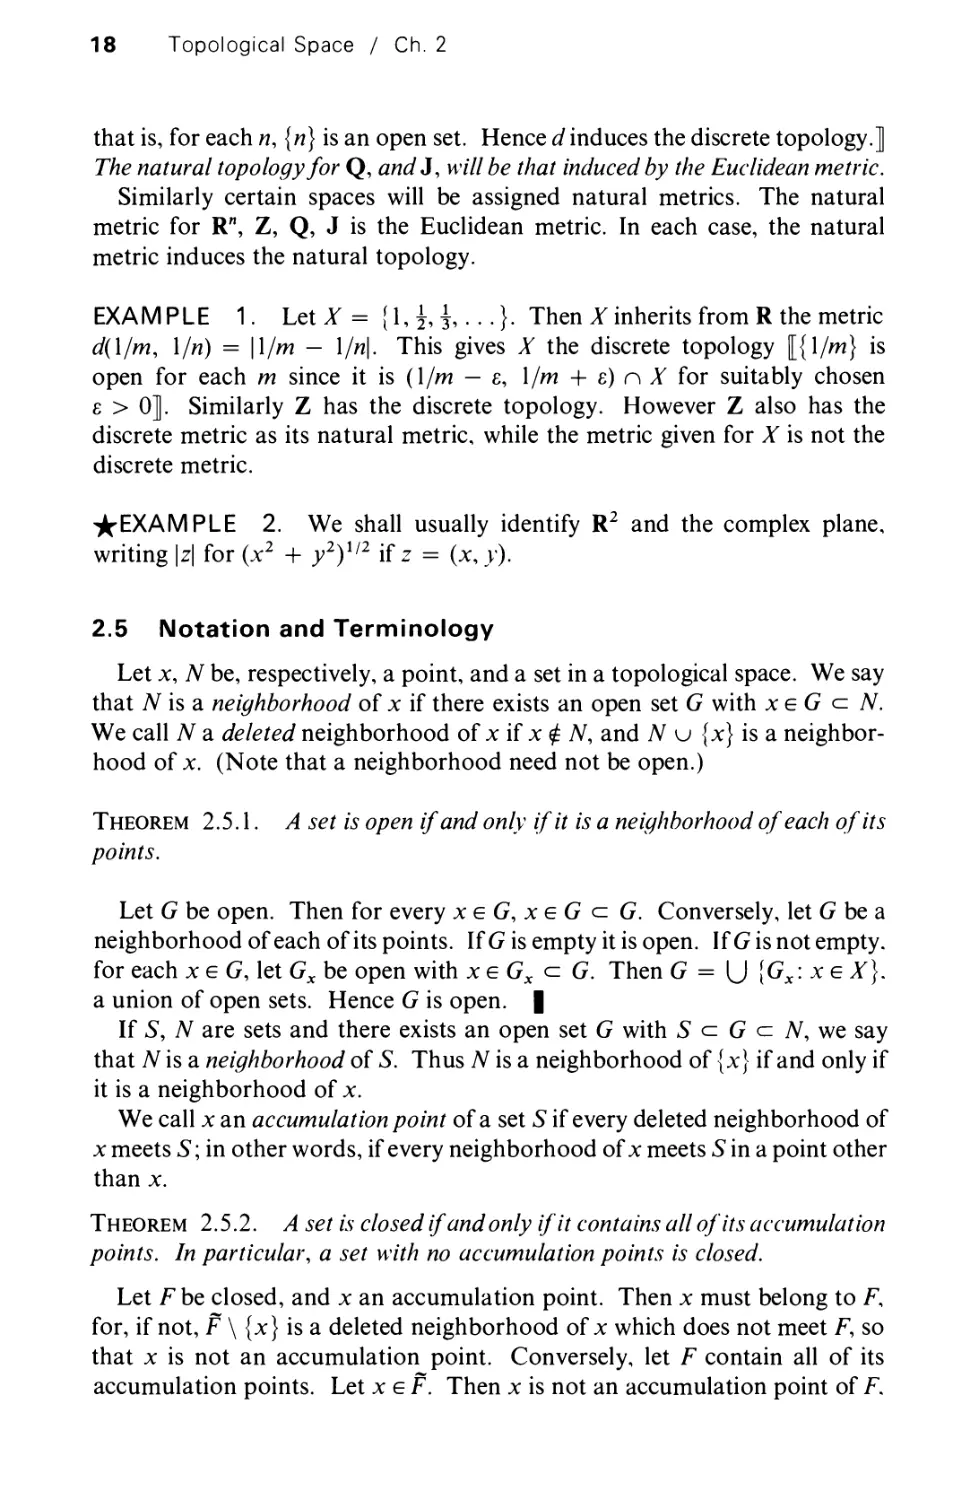 2.5 Notation and terminology  18